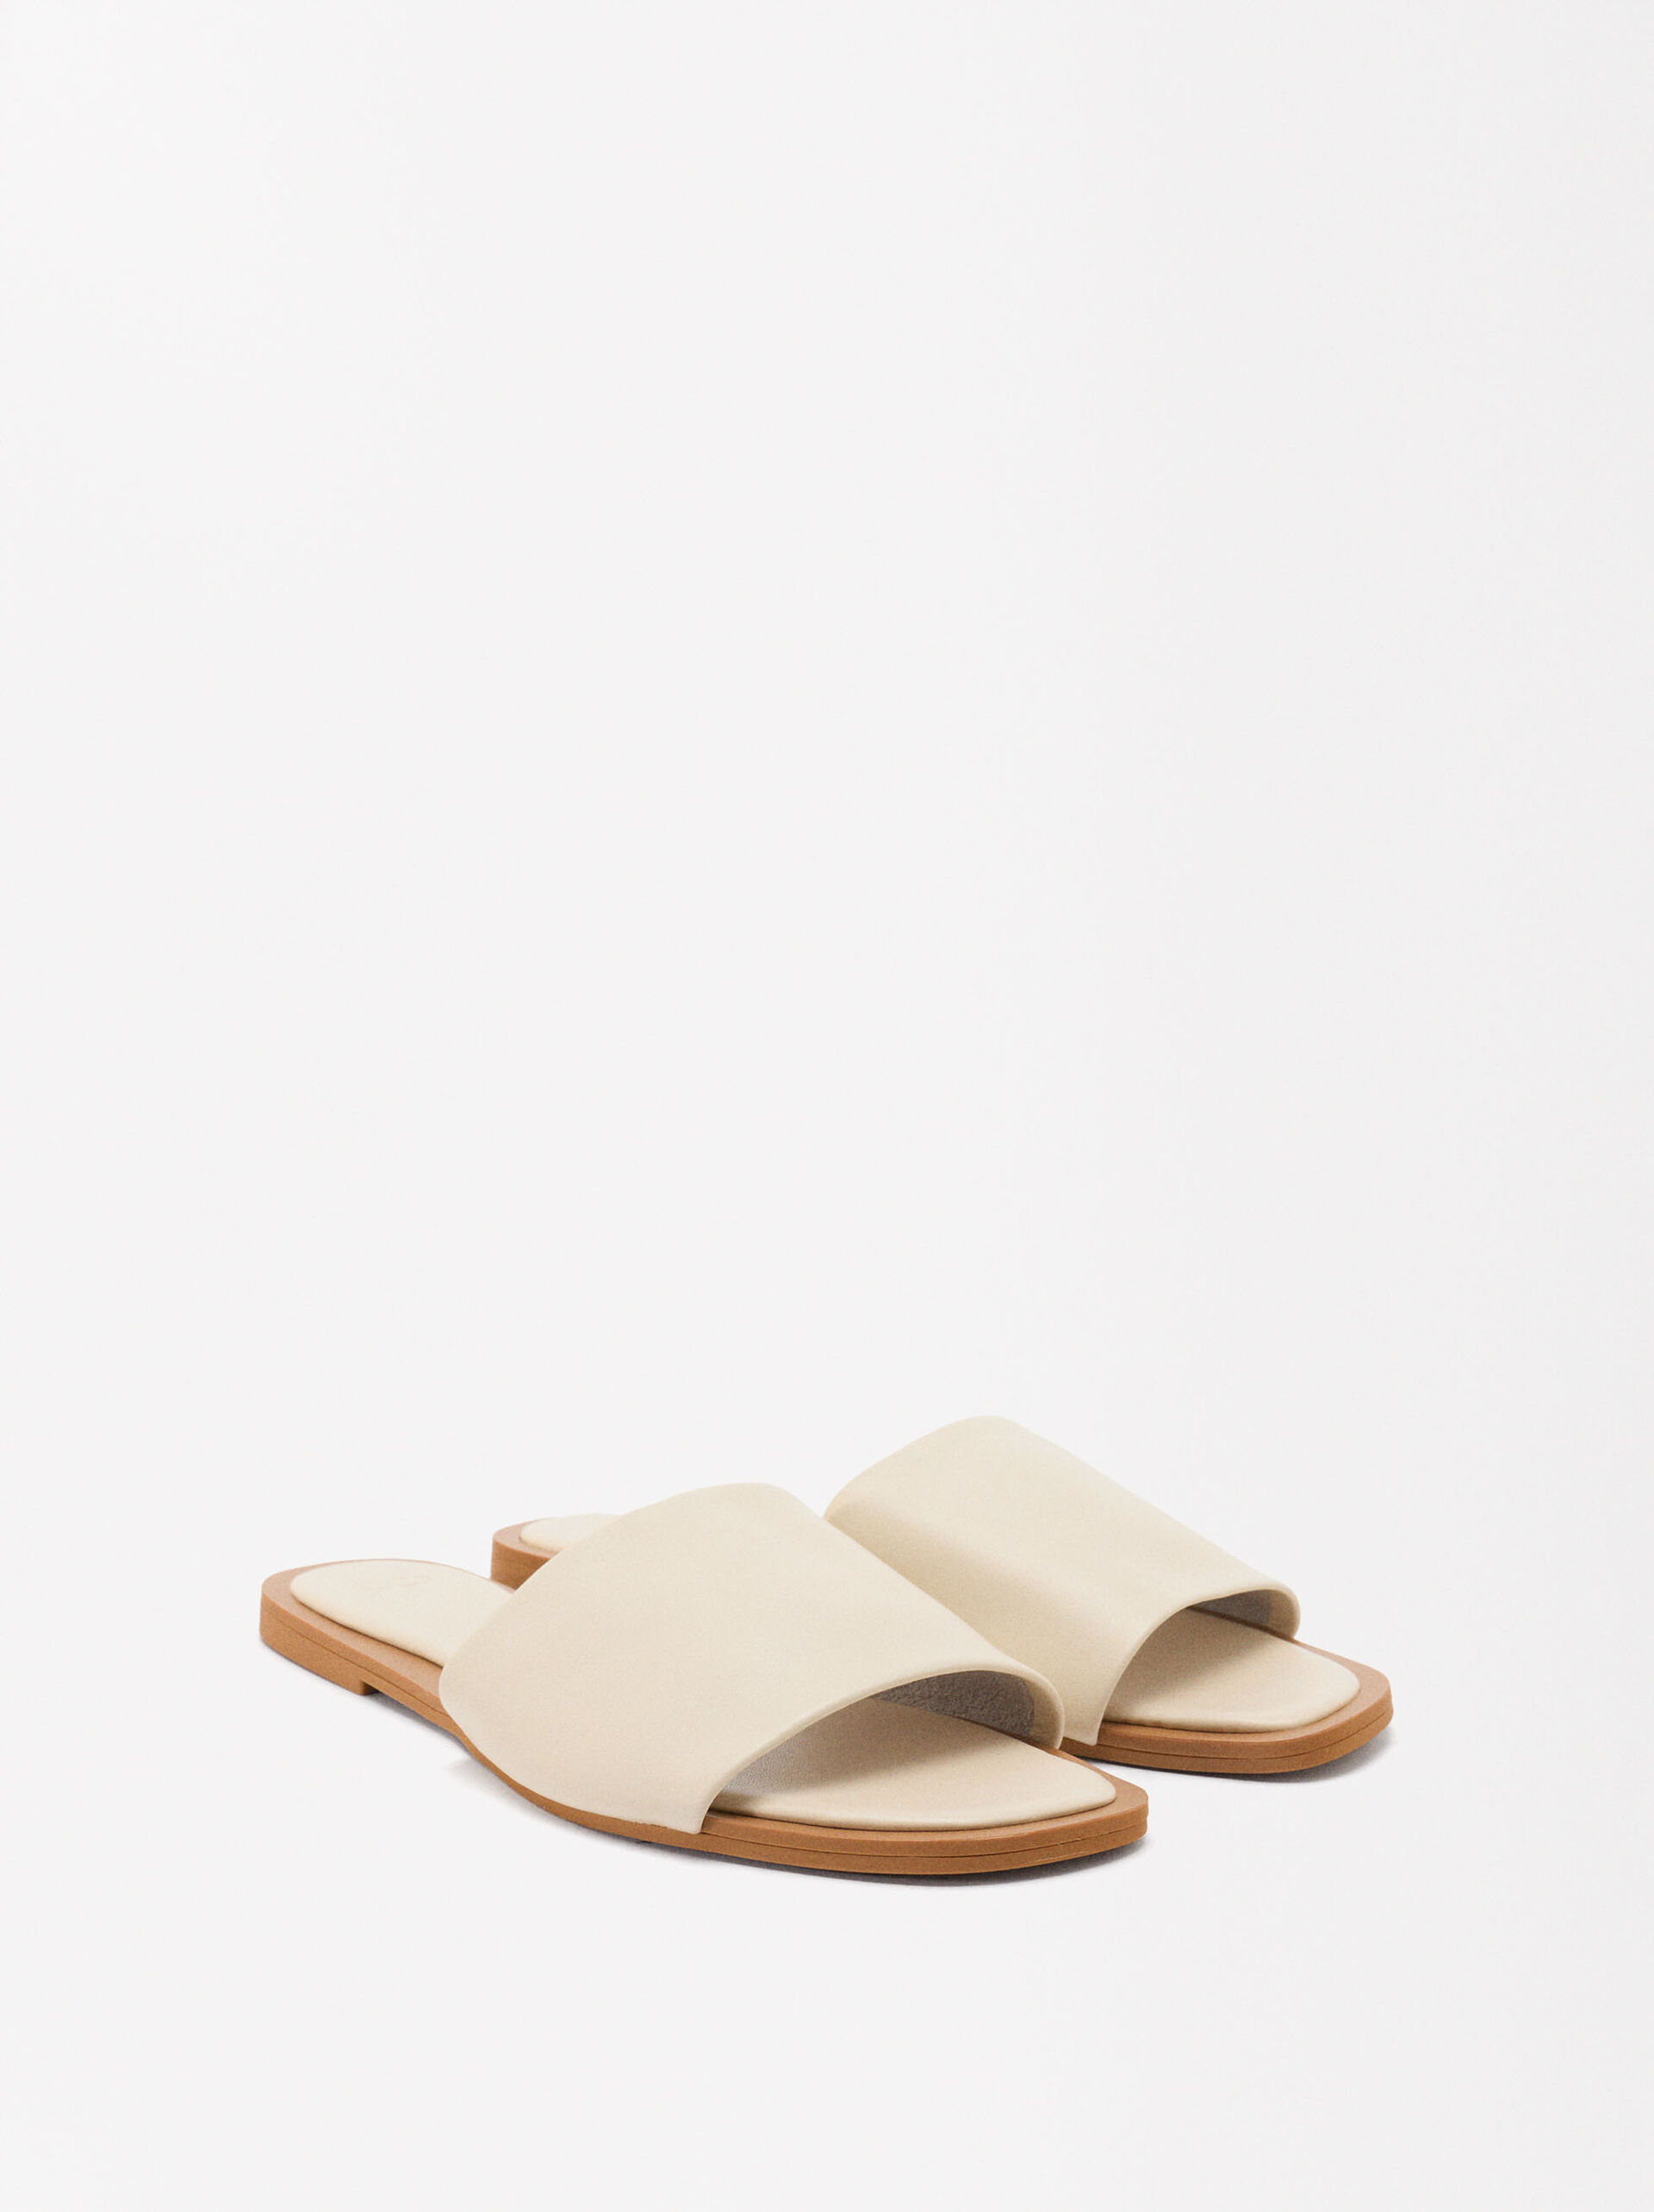 Napa Leather Sandals image number 0.0